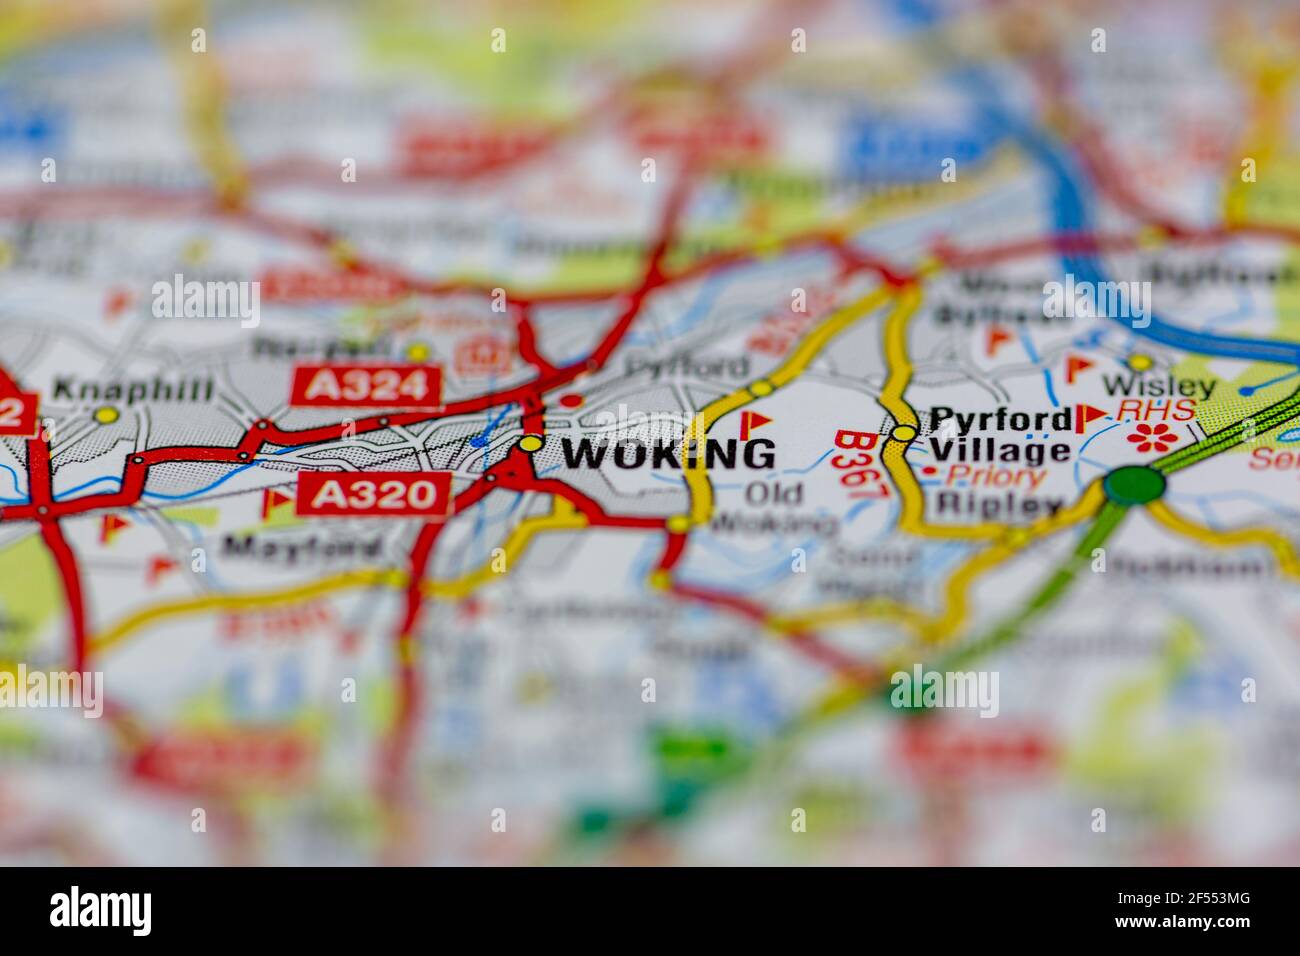 Woking Shown on a Geography map or road map Stock Photo